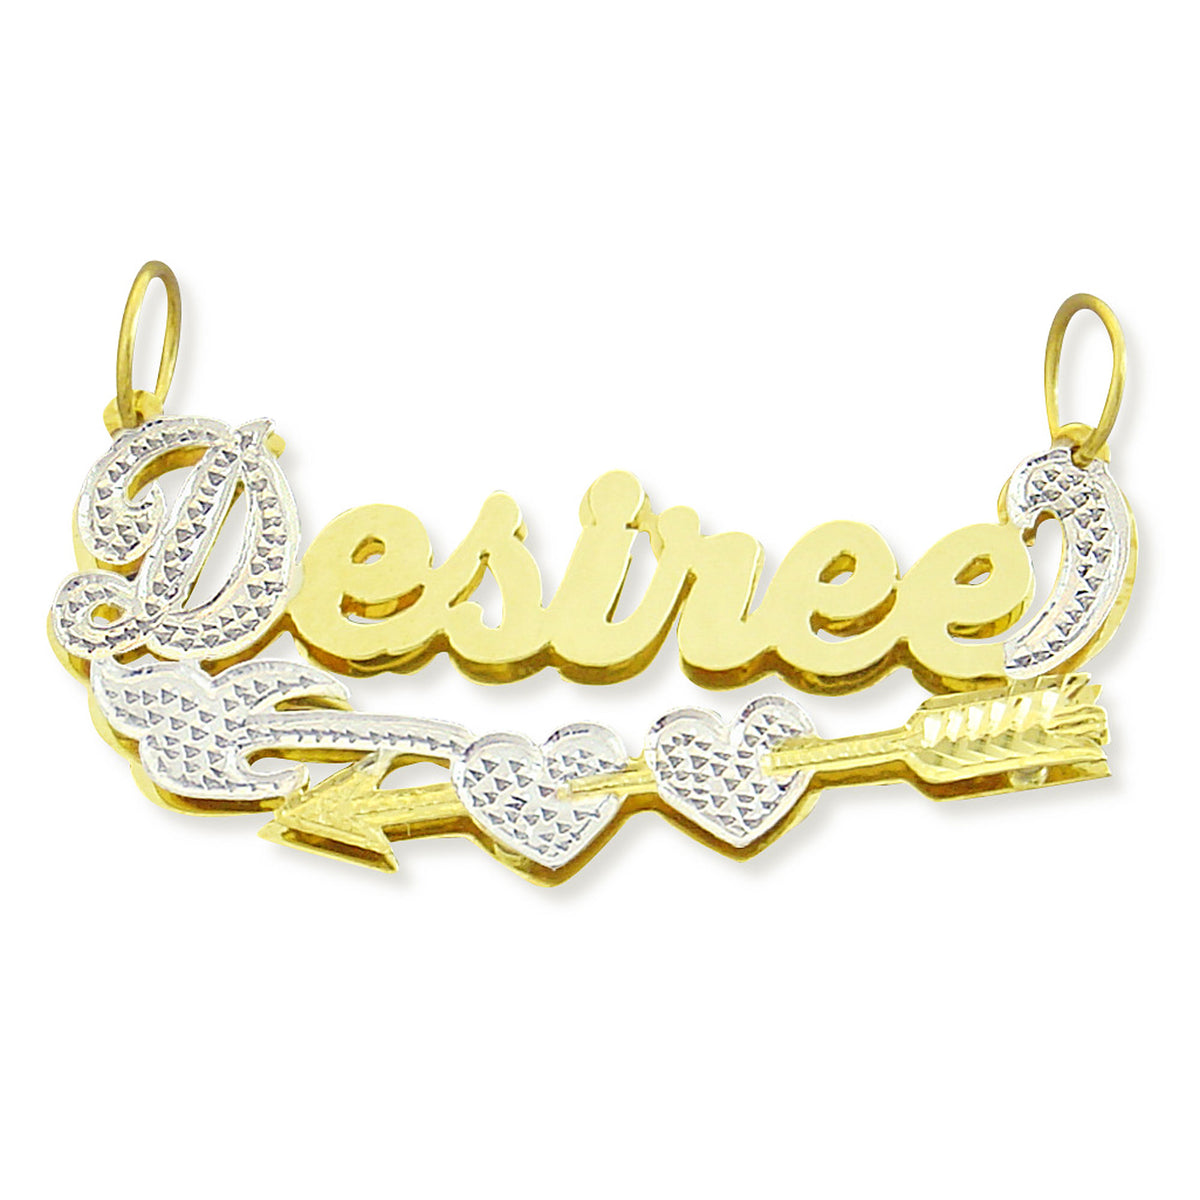 Solid Gold Personalized Jewelry 3D Name Charm 2 Tone Cupid Arrow Pendant ND47